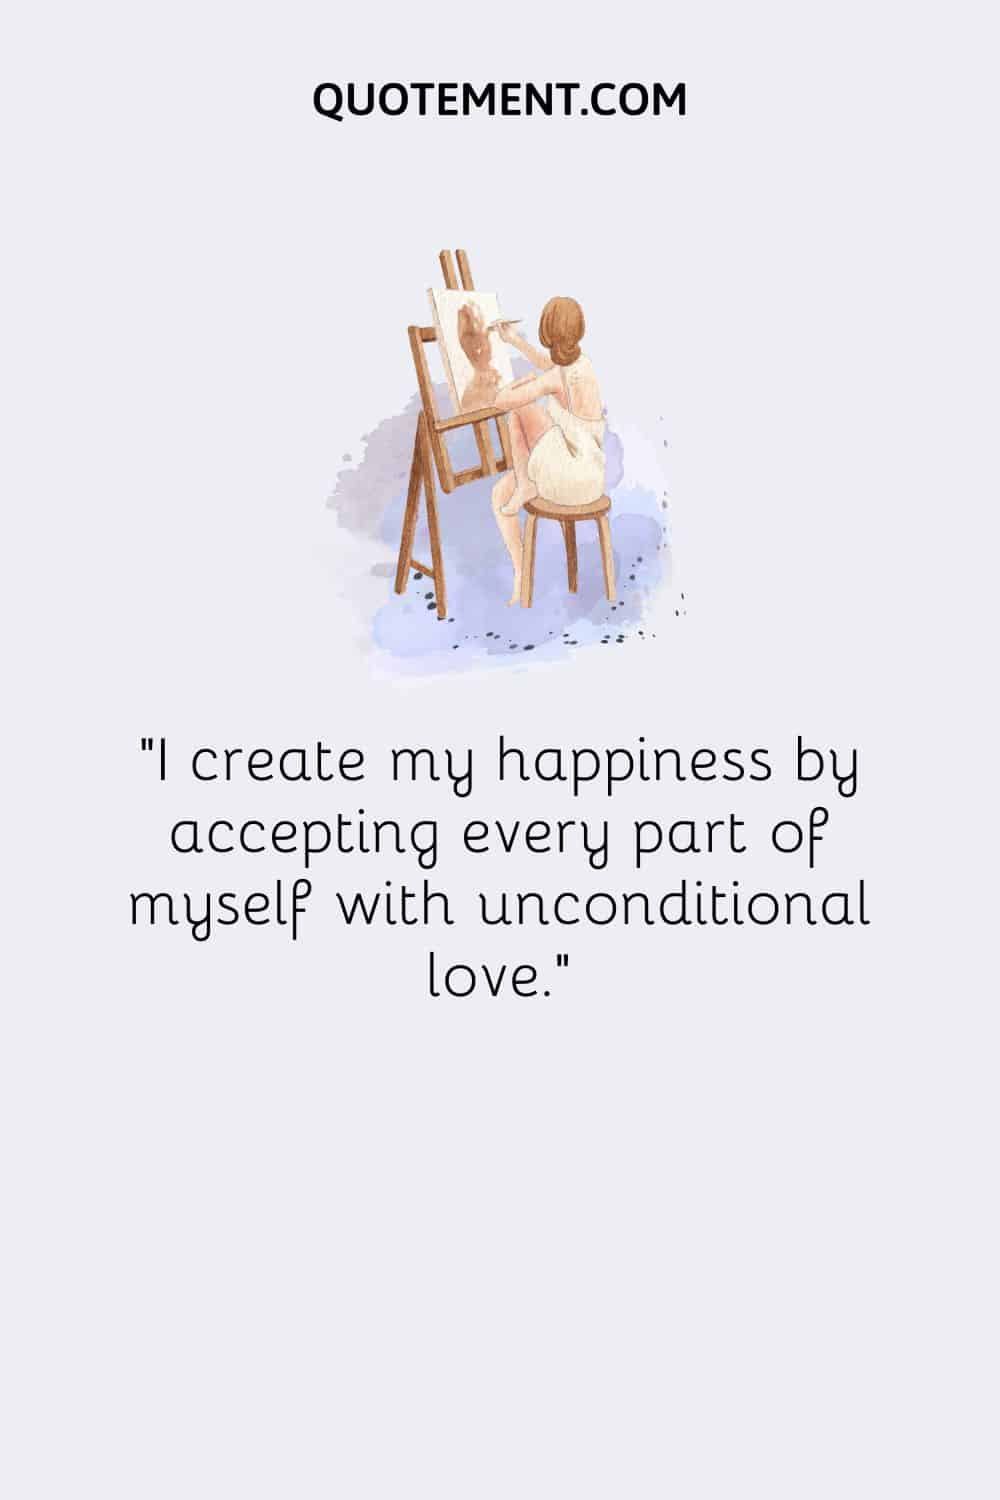 I create my happiness by accepting every part of myself with unconditional love.